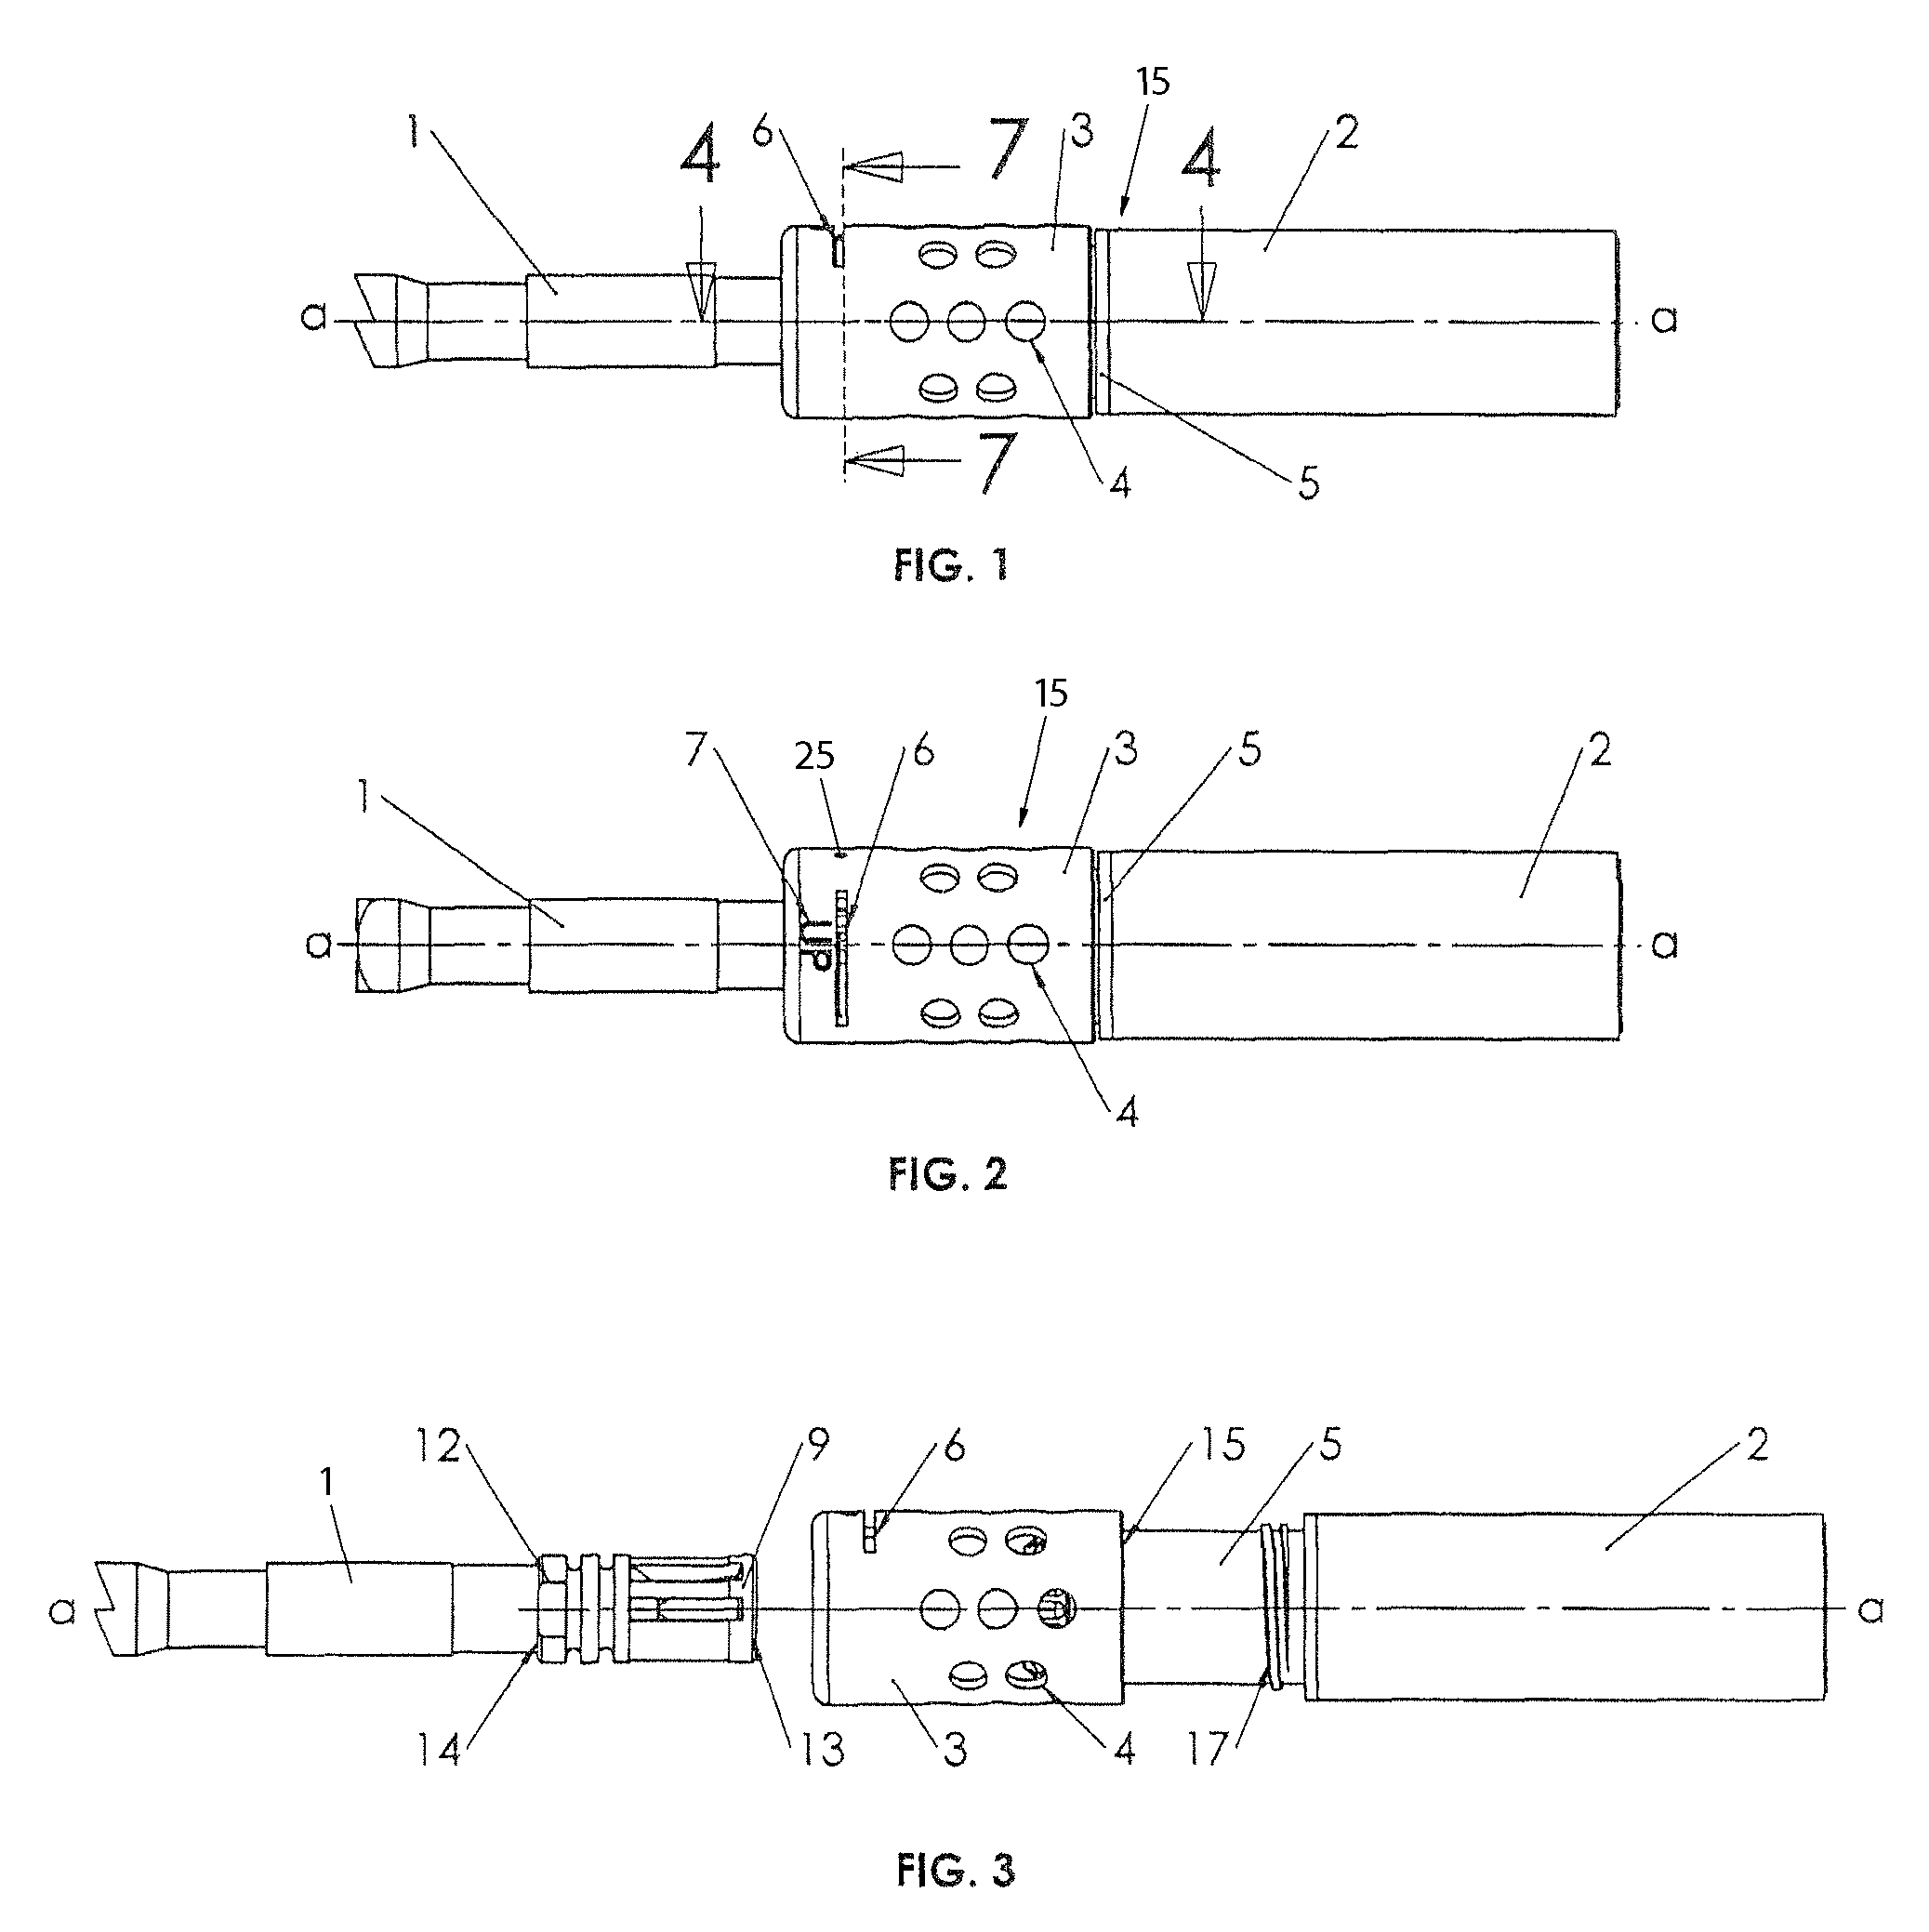 Omni indexing mount primarily for attaching a noise suppressor or other auxiliary device to a firearm